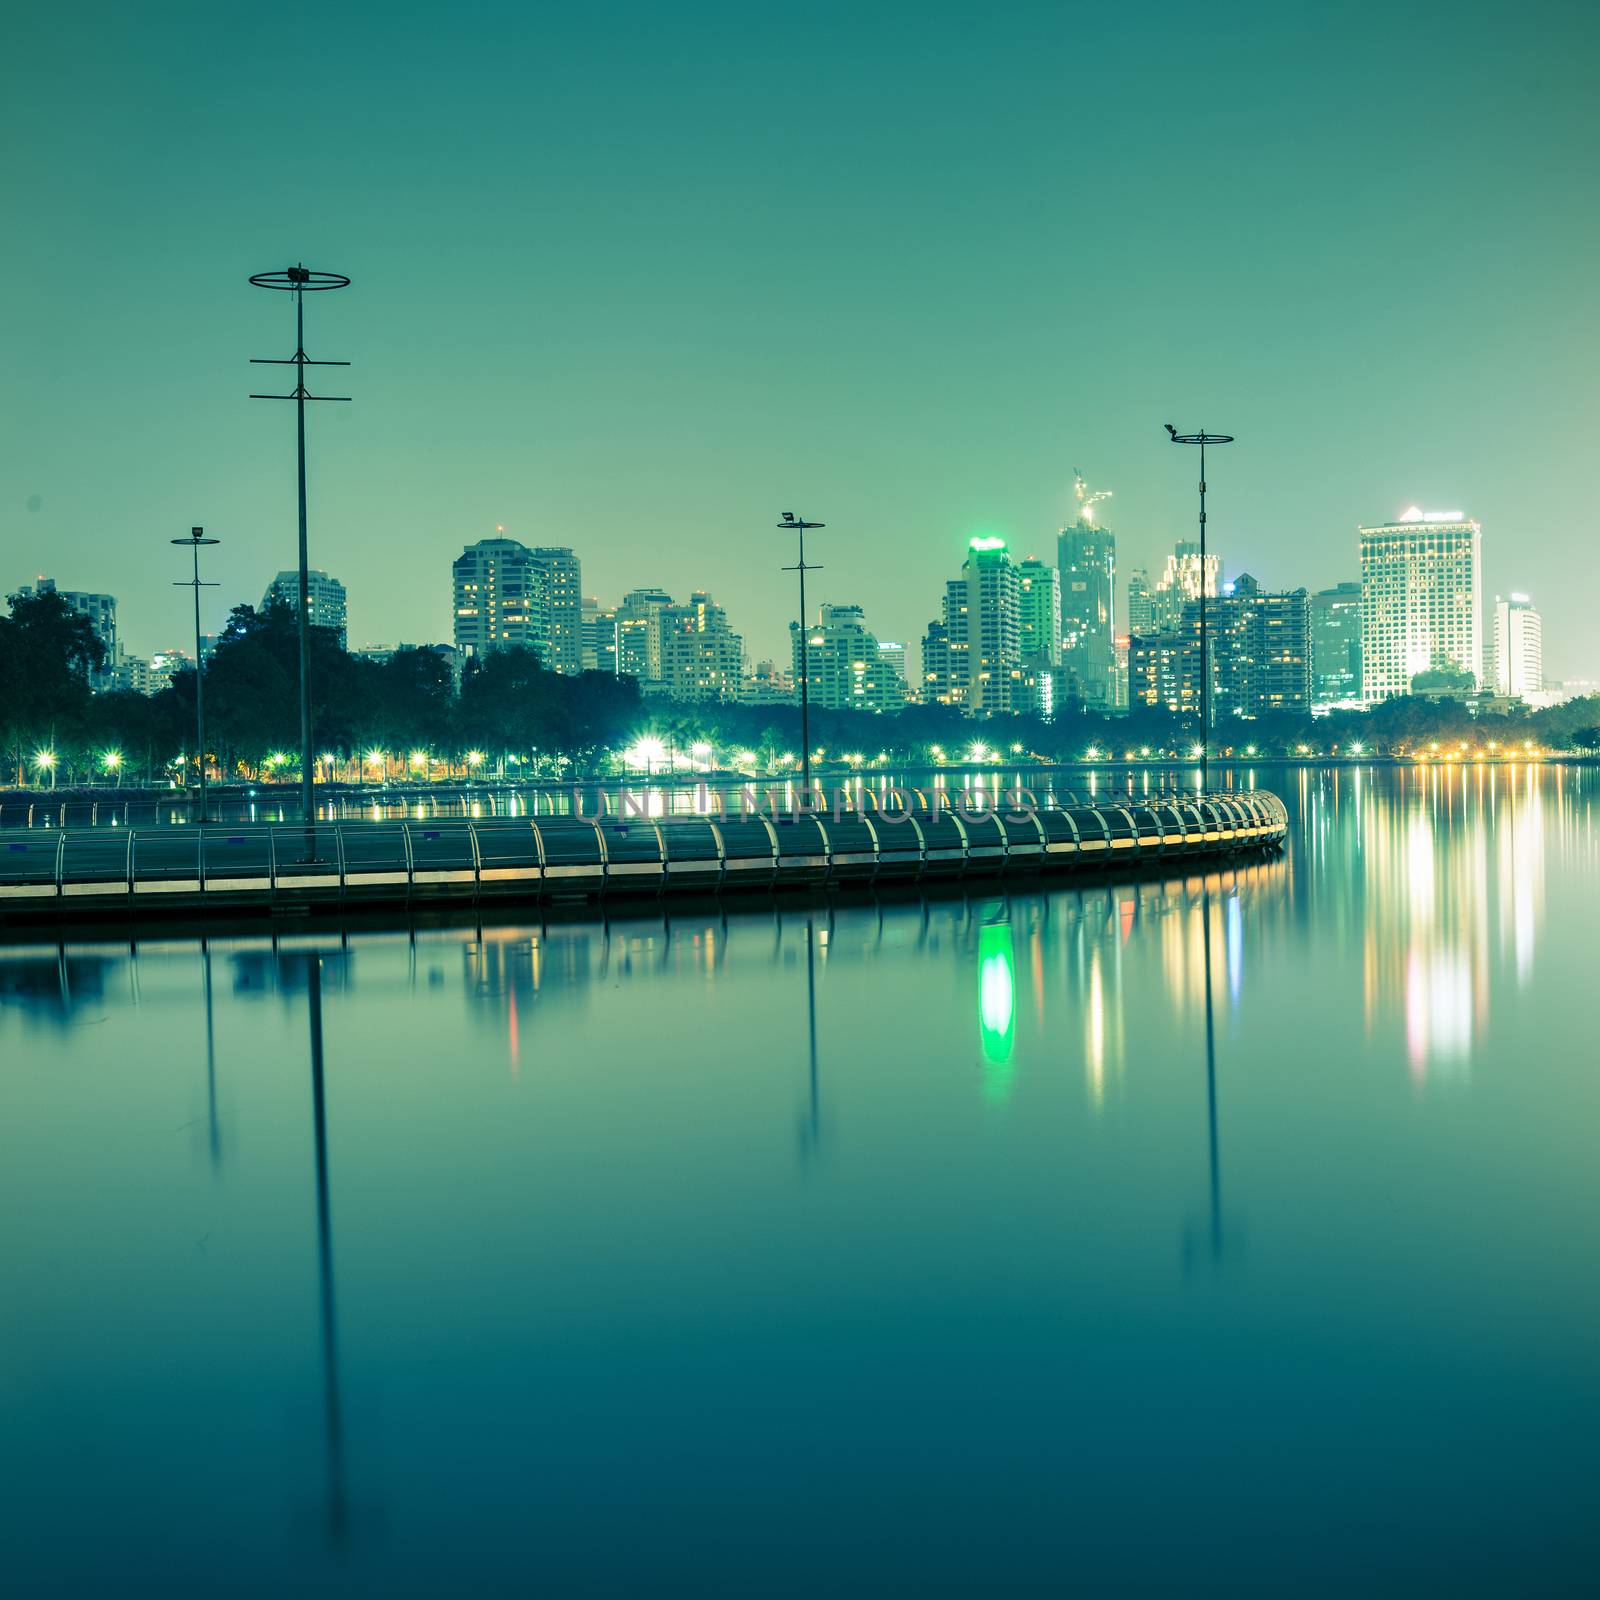 City at night with reflection of skyline,Vintage tone by jakgree